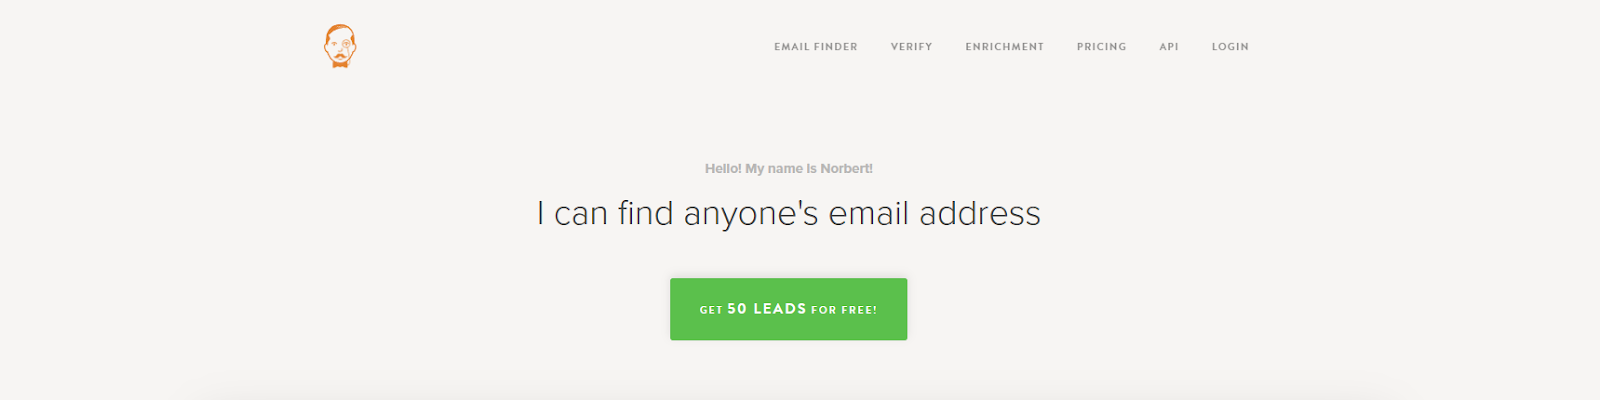 email finder tool 